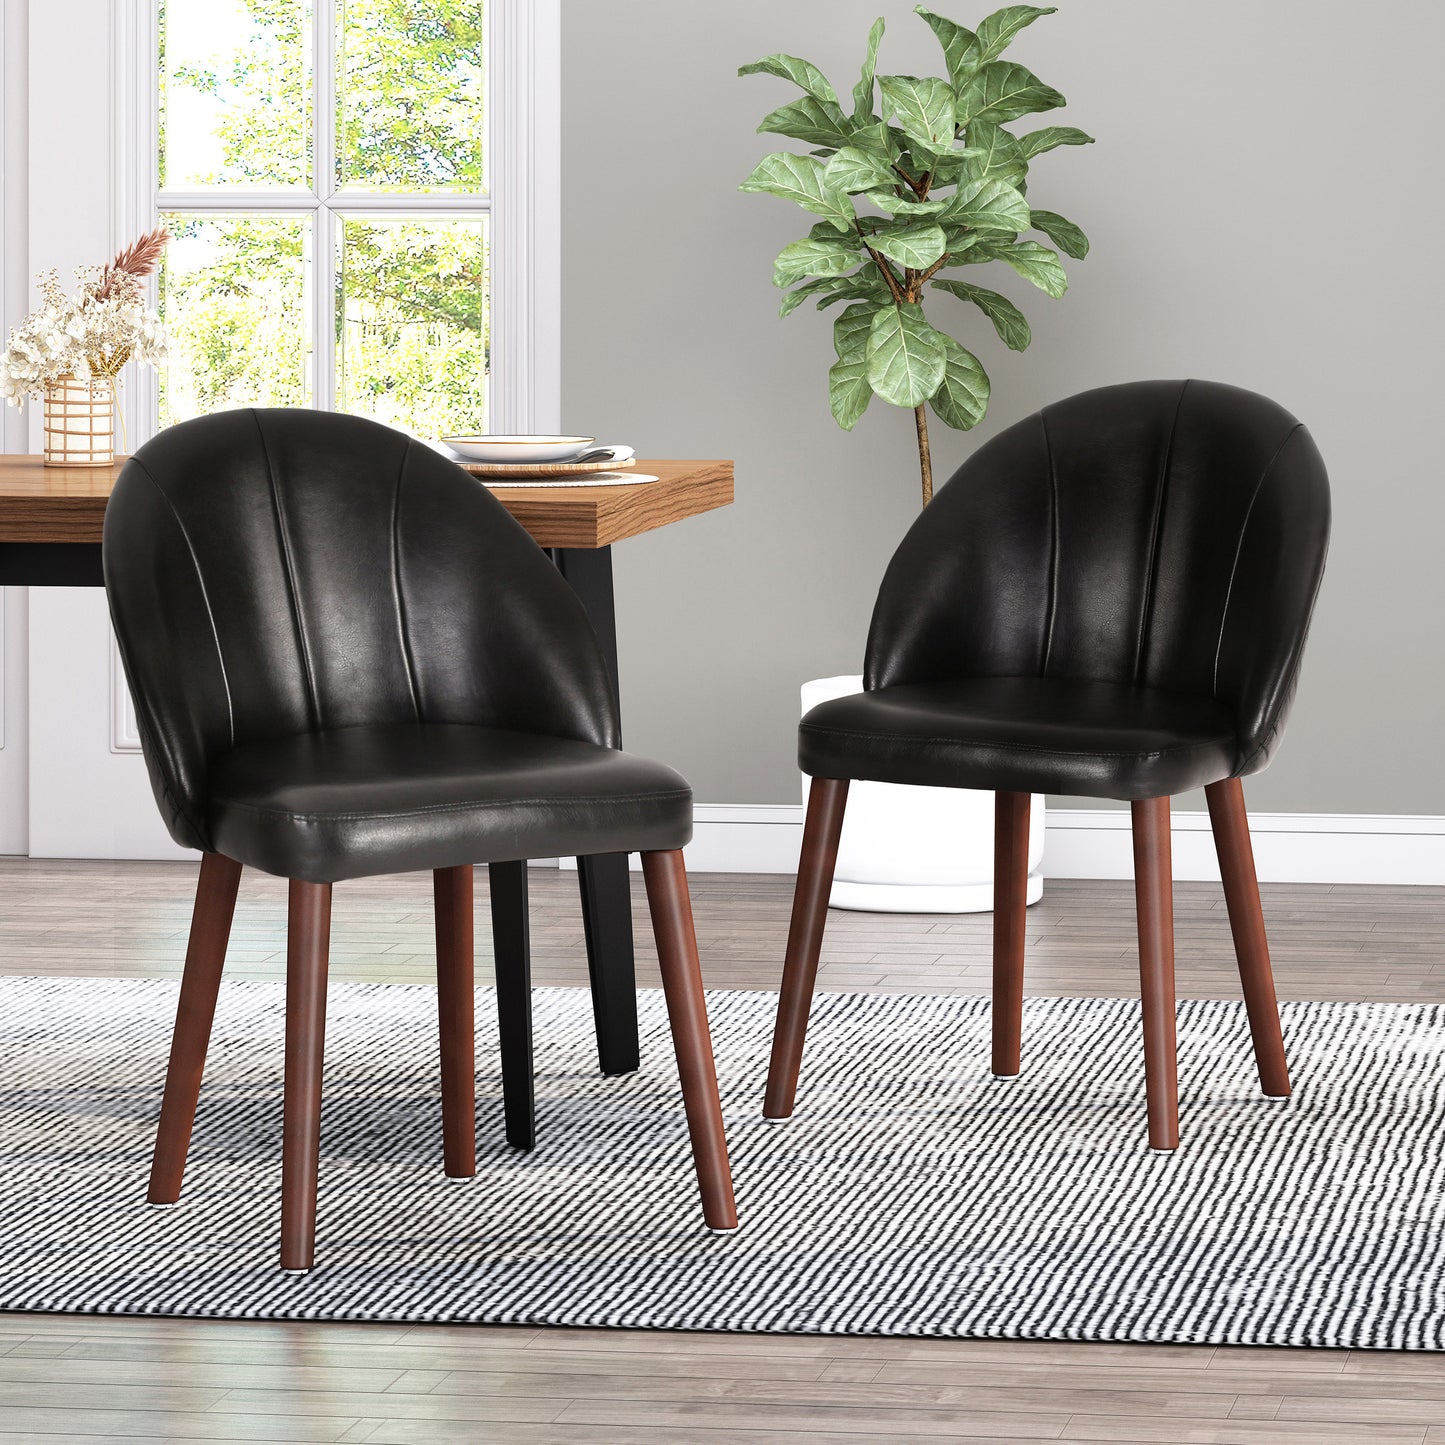 Lewiston Contemporary Channel Stitch Dining Chairs, Set of 2